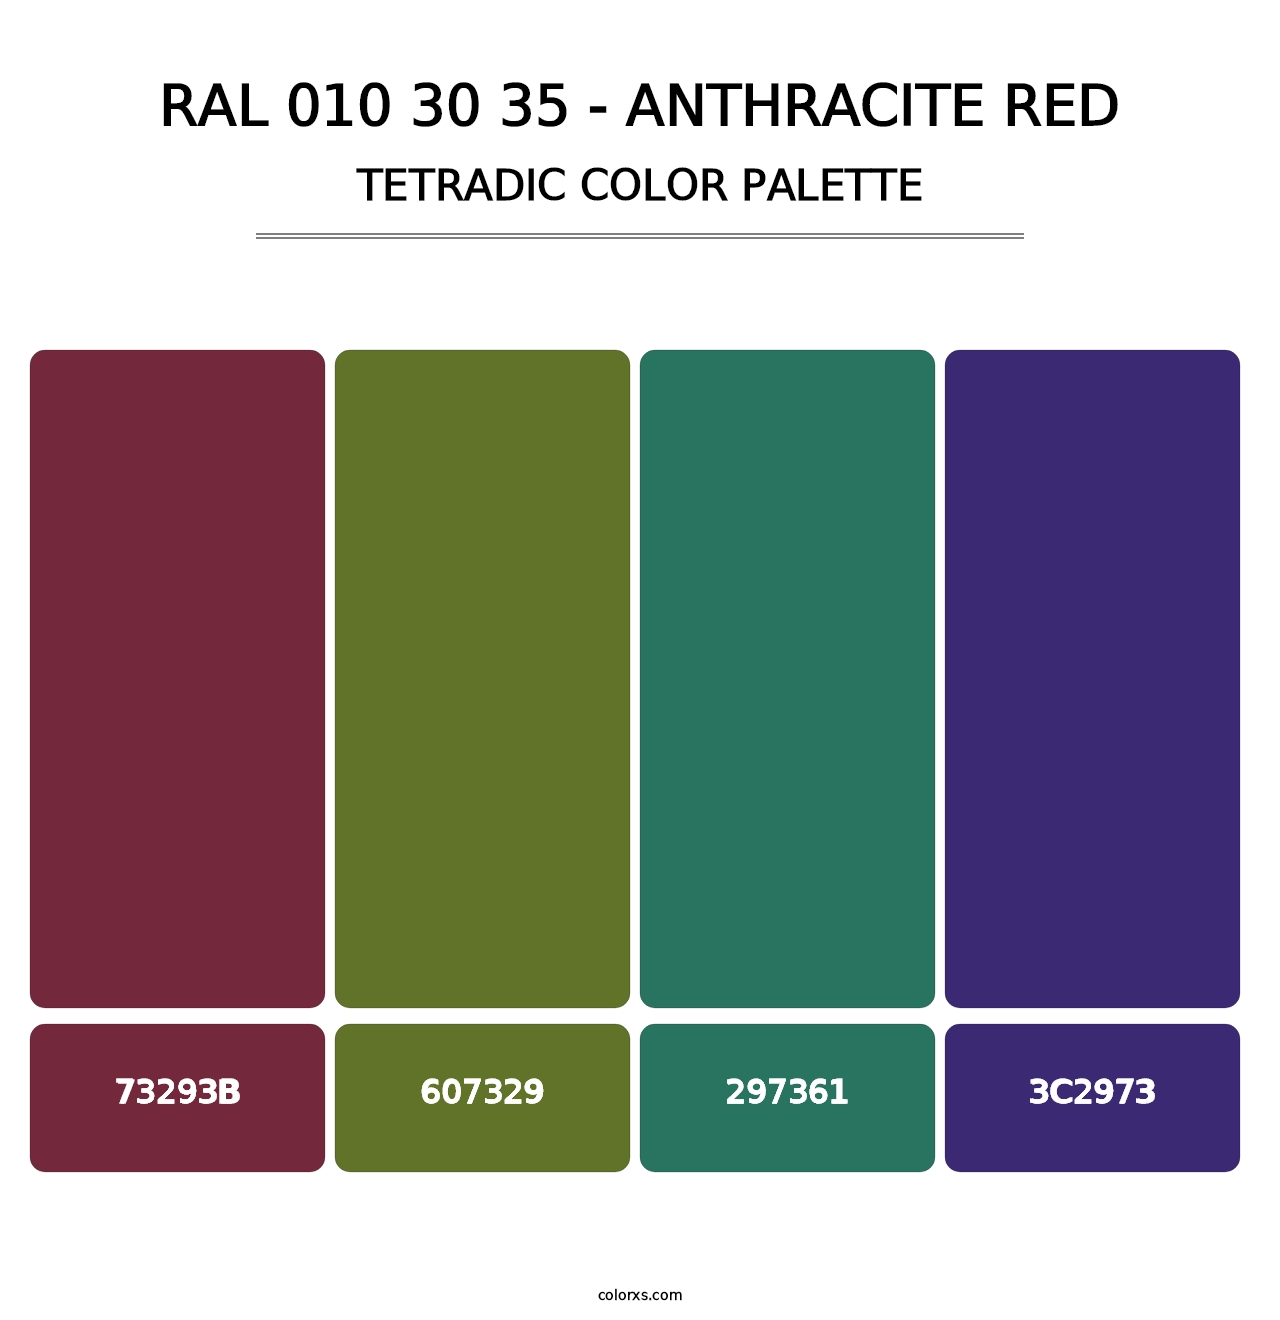 RAL 010 30 35 - Anthracite Red - Tetradic Color Palette